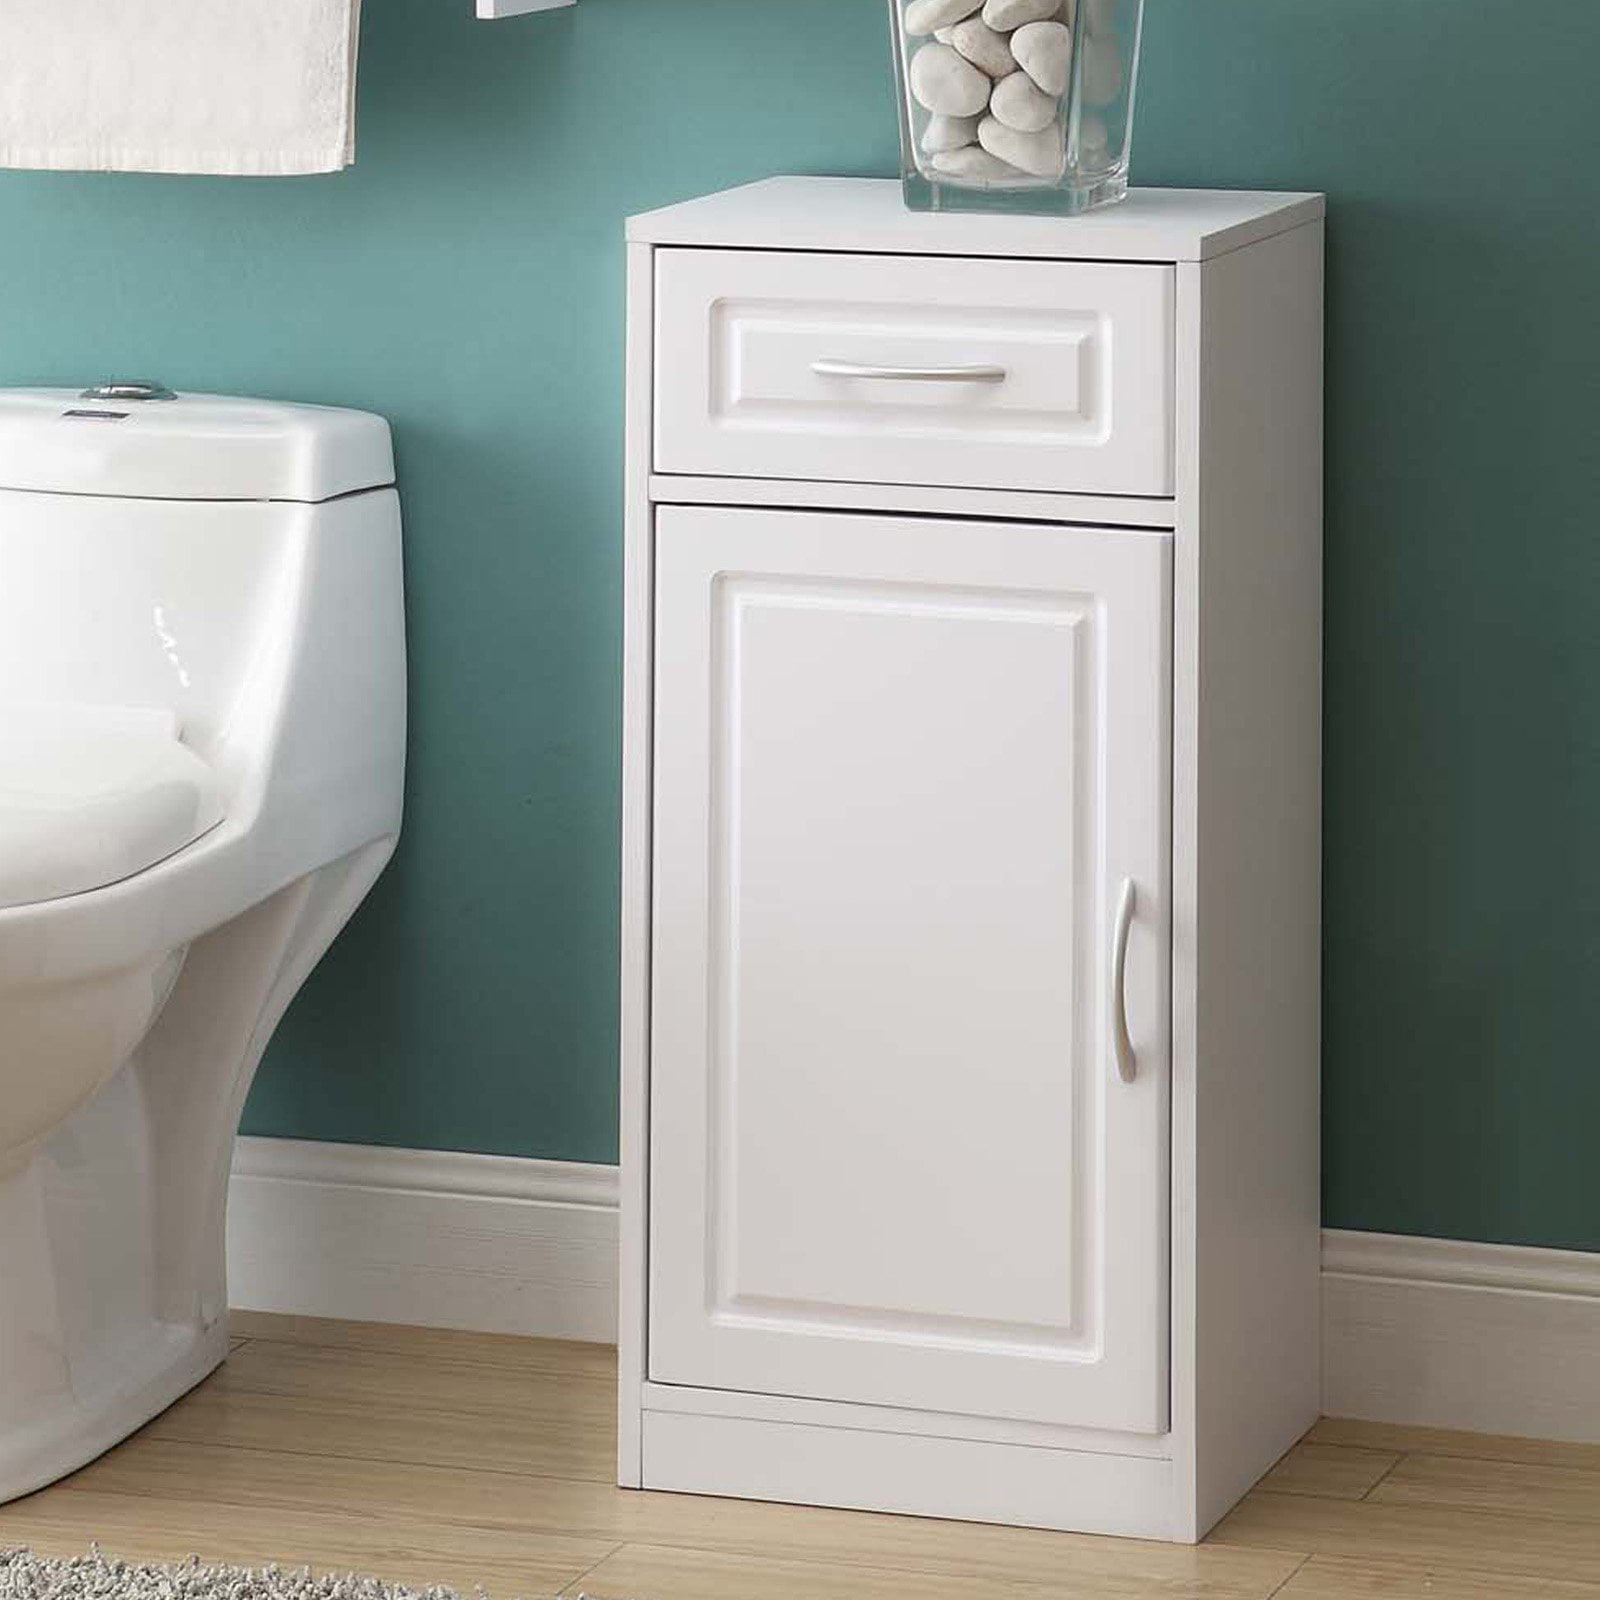 4D Concepts White Bathroom Base Cabinet with One Door - Walmart.com ...